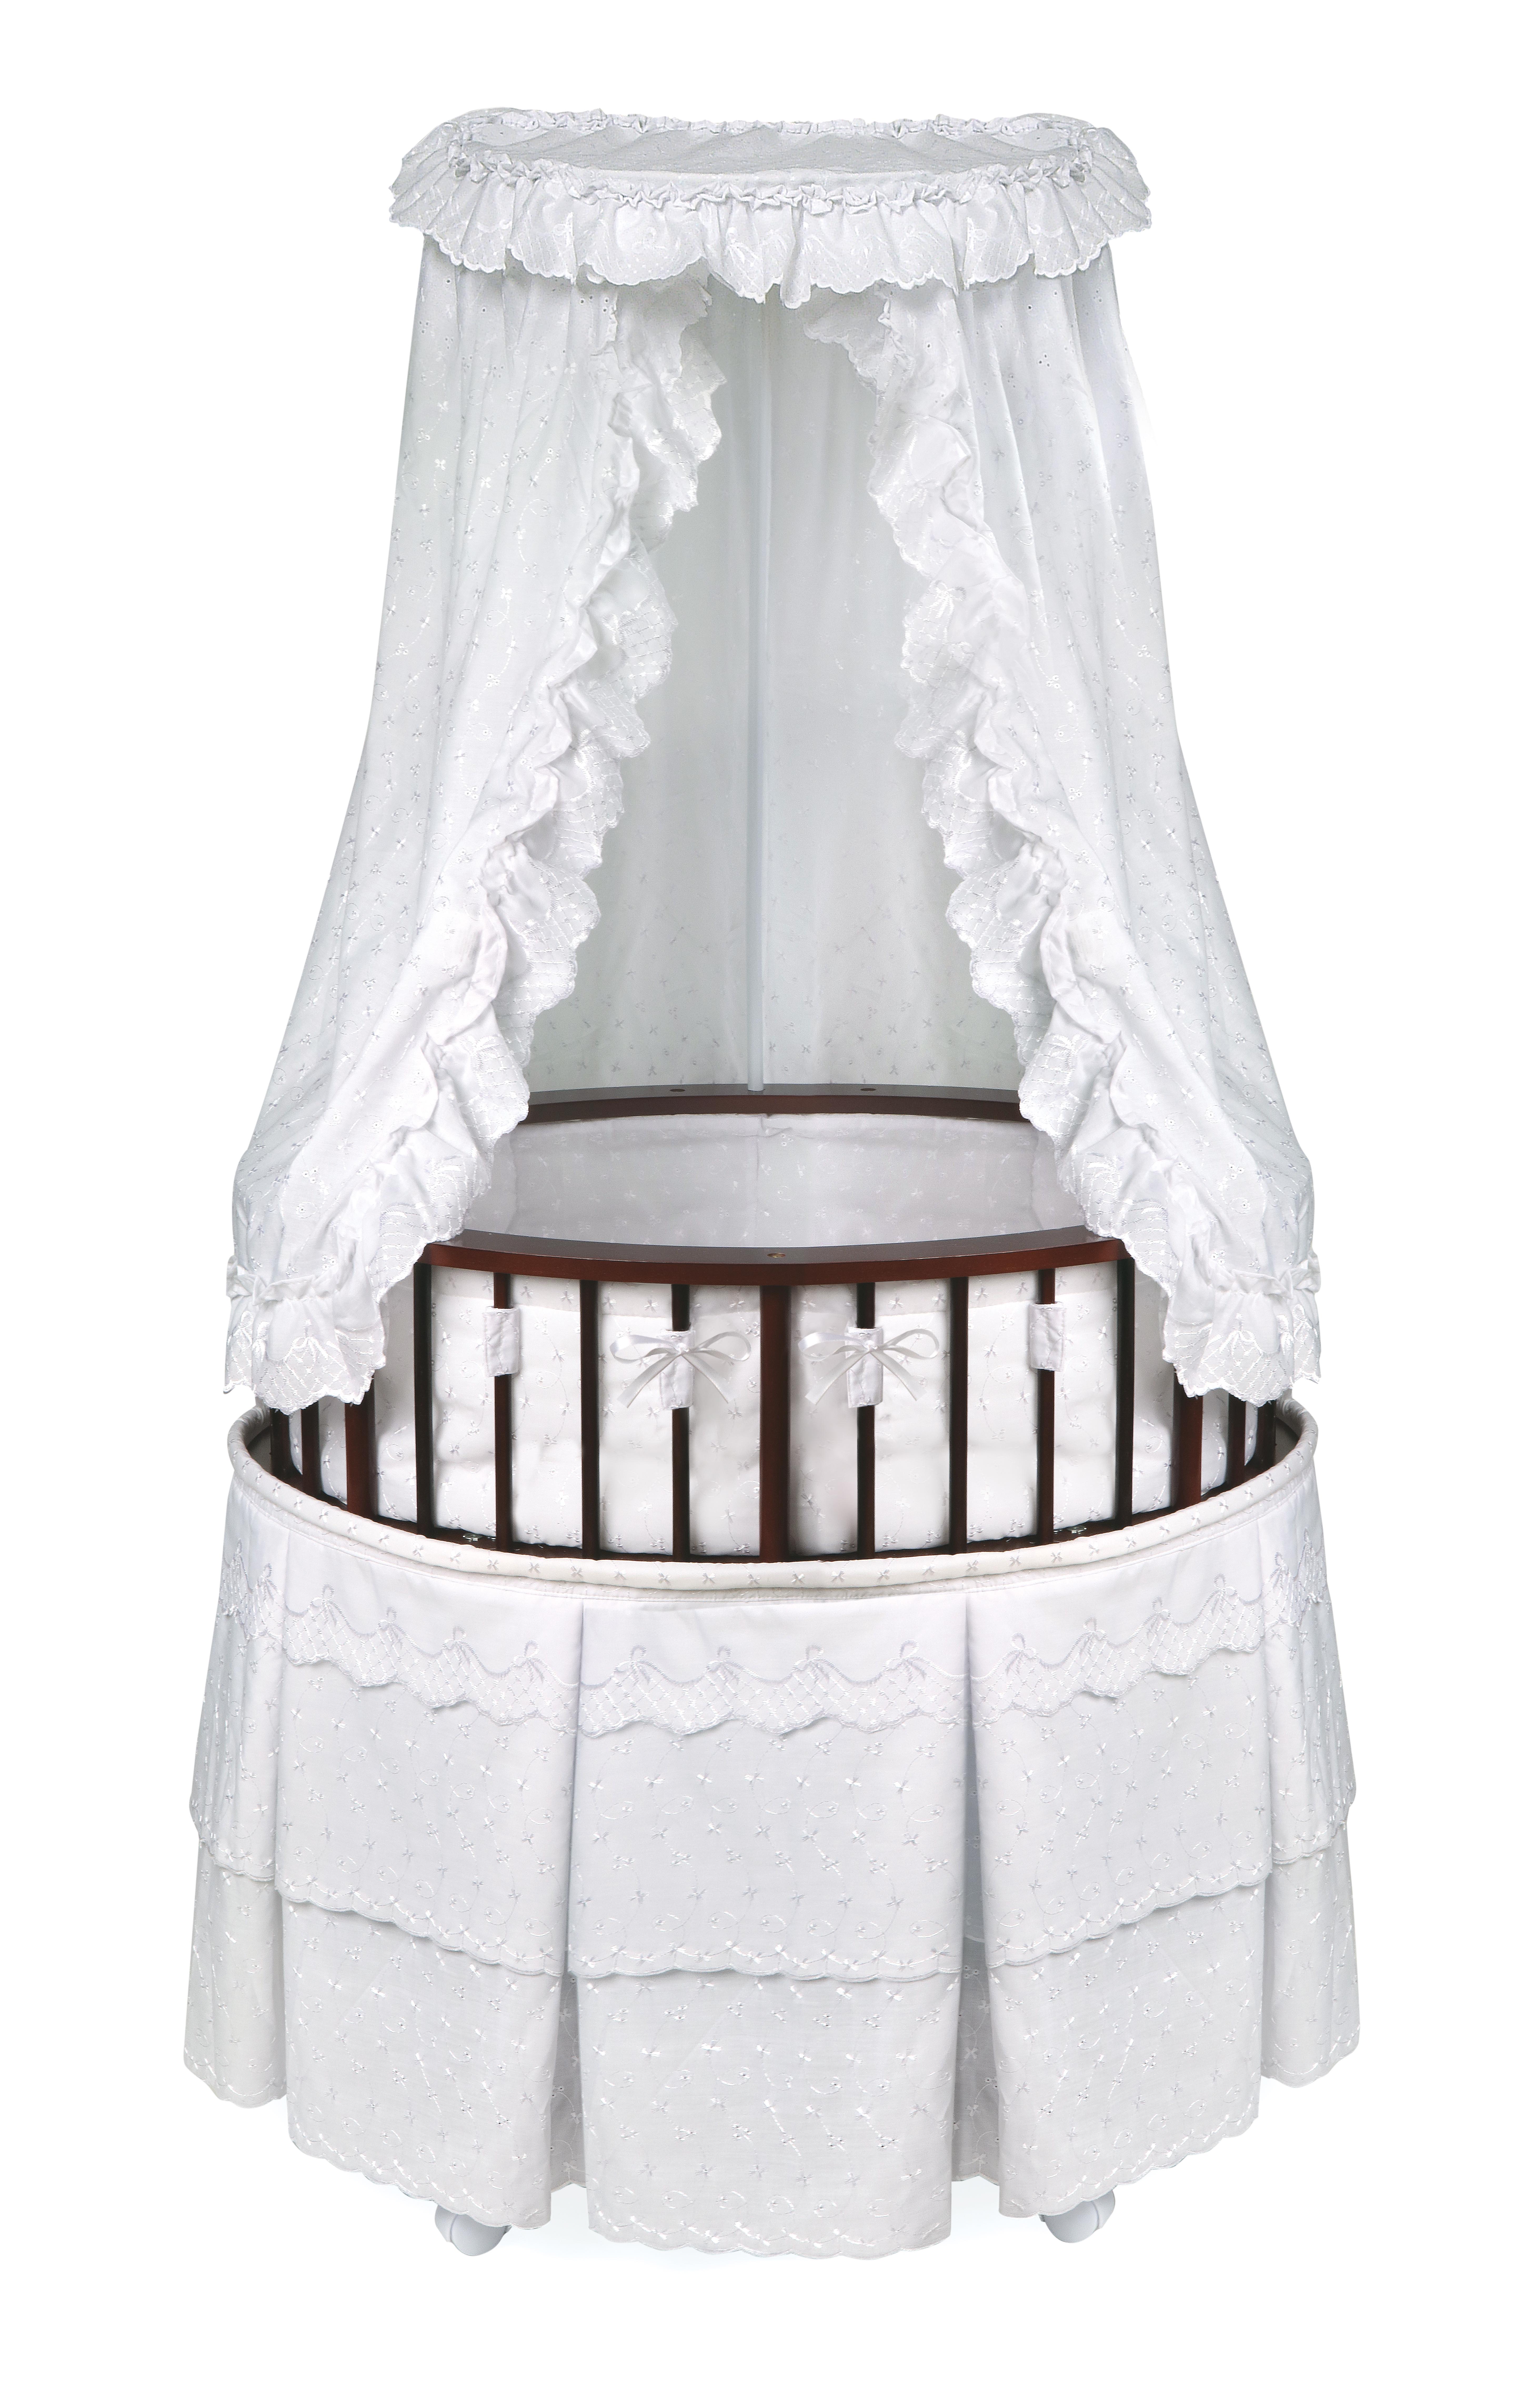 Elite Oval Baby Bassinet with Canopy - Cherry/White